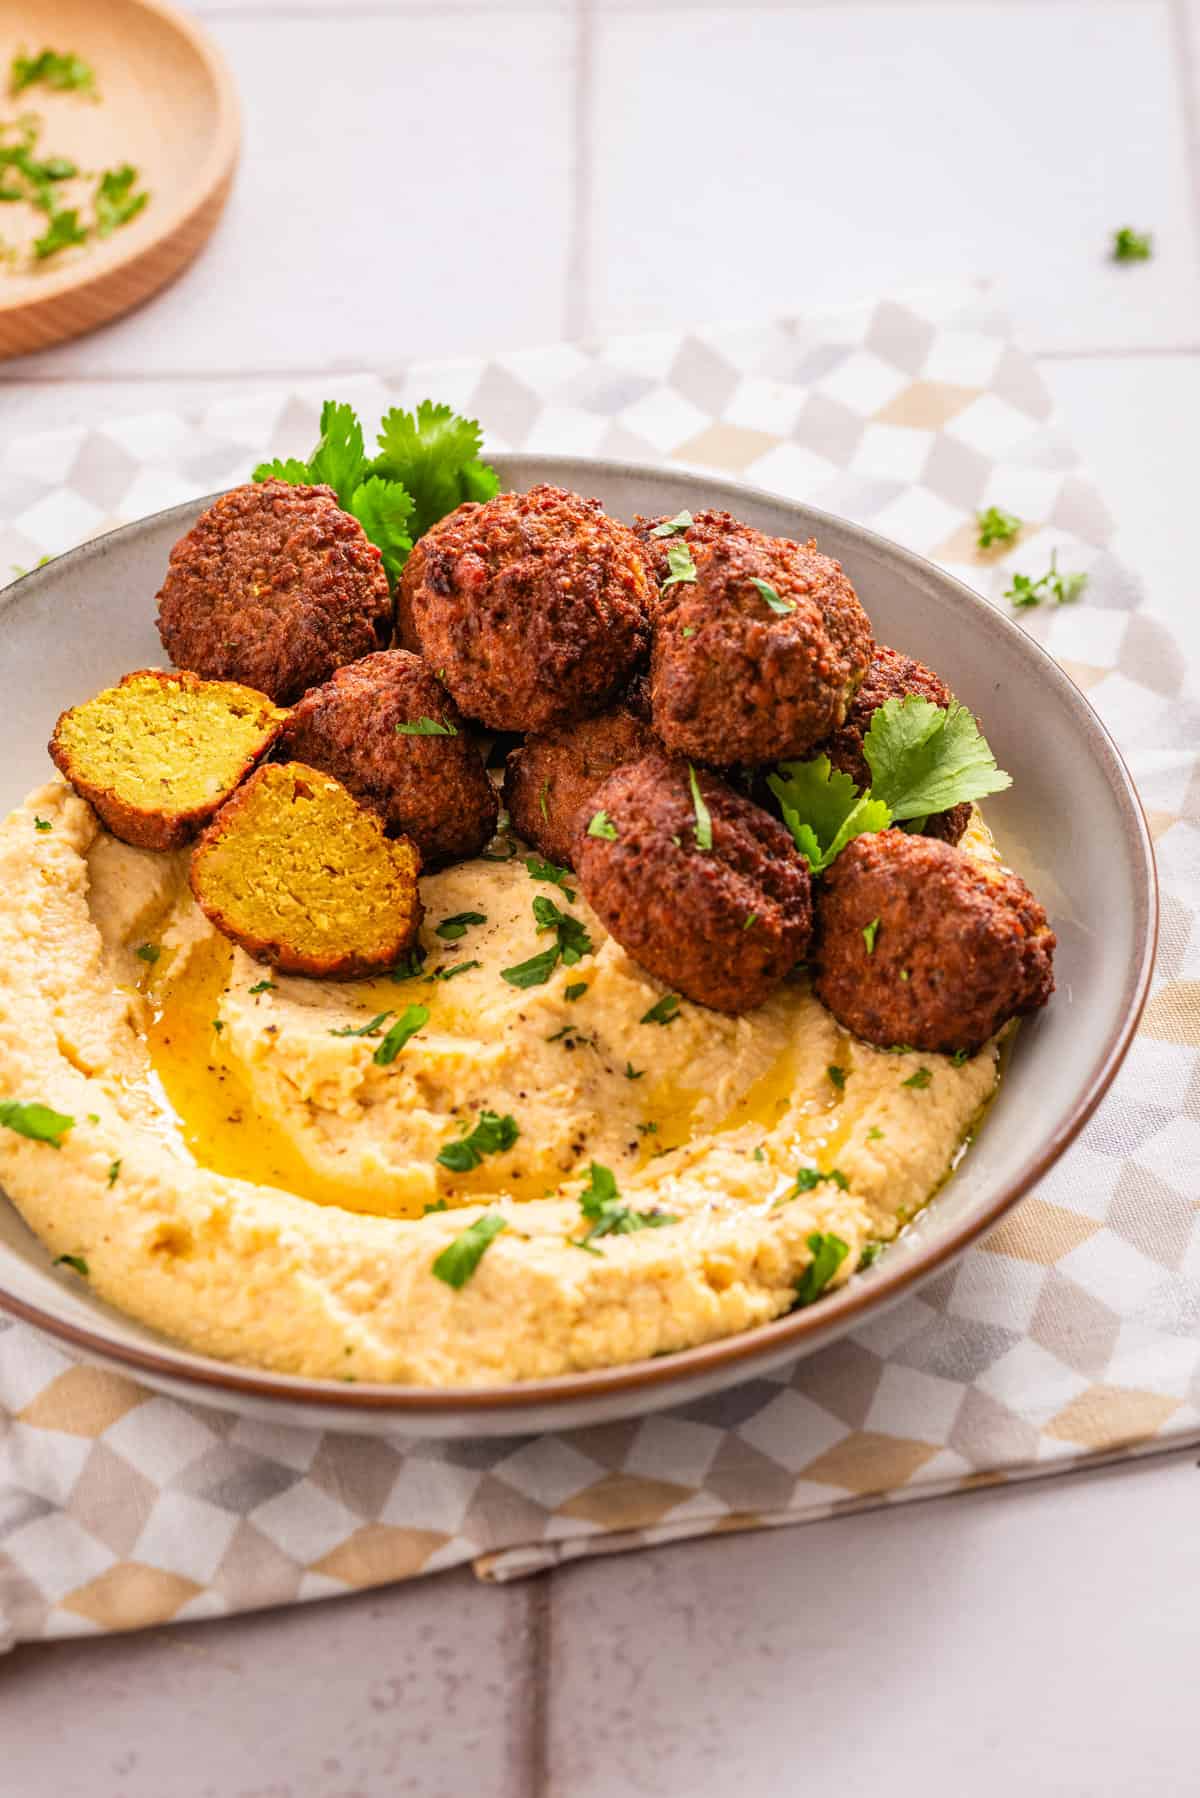 An image of falafels arranged on top of a white bowl filled with creamy hummus.